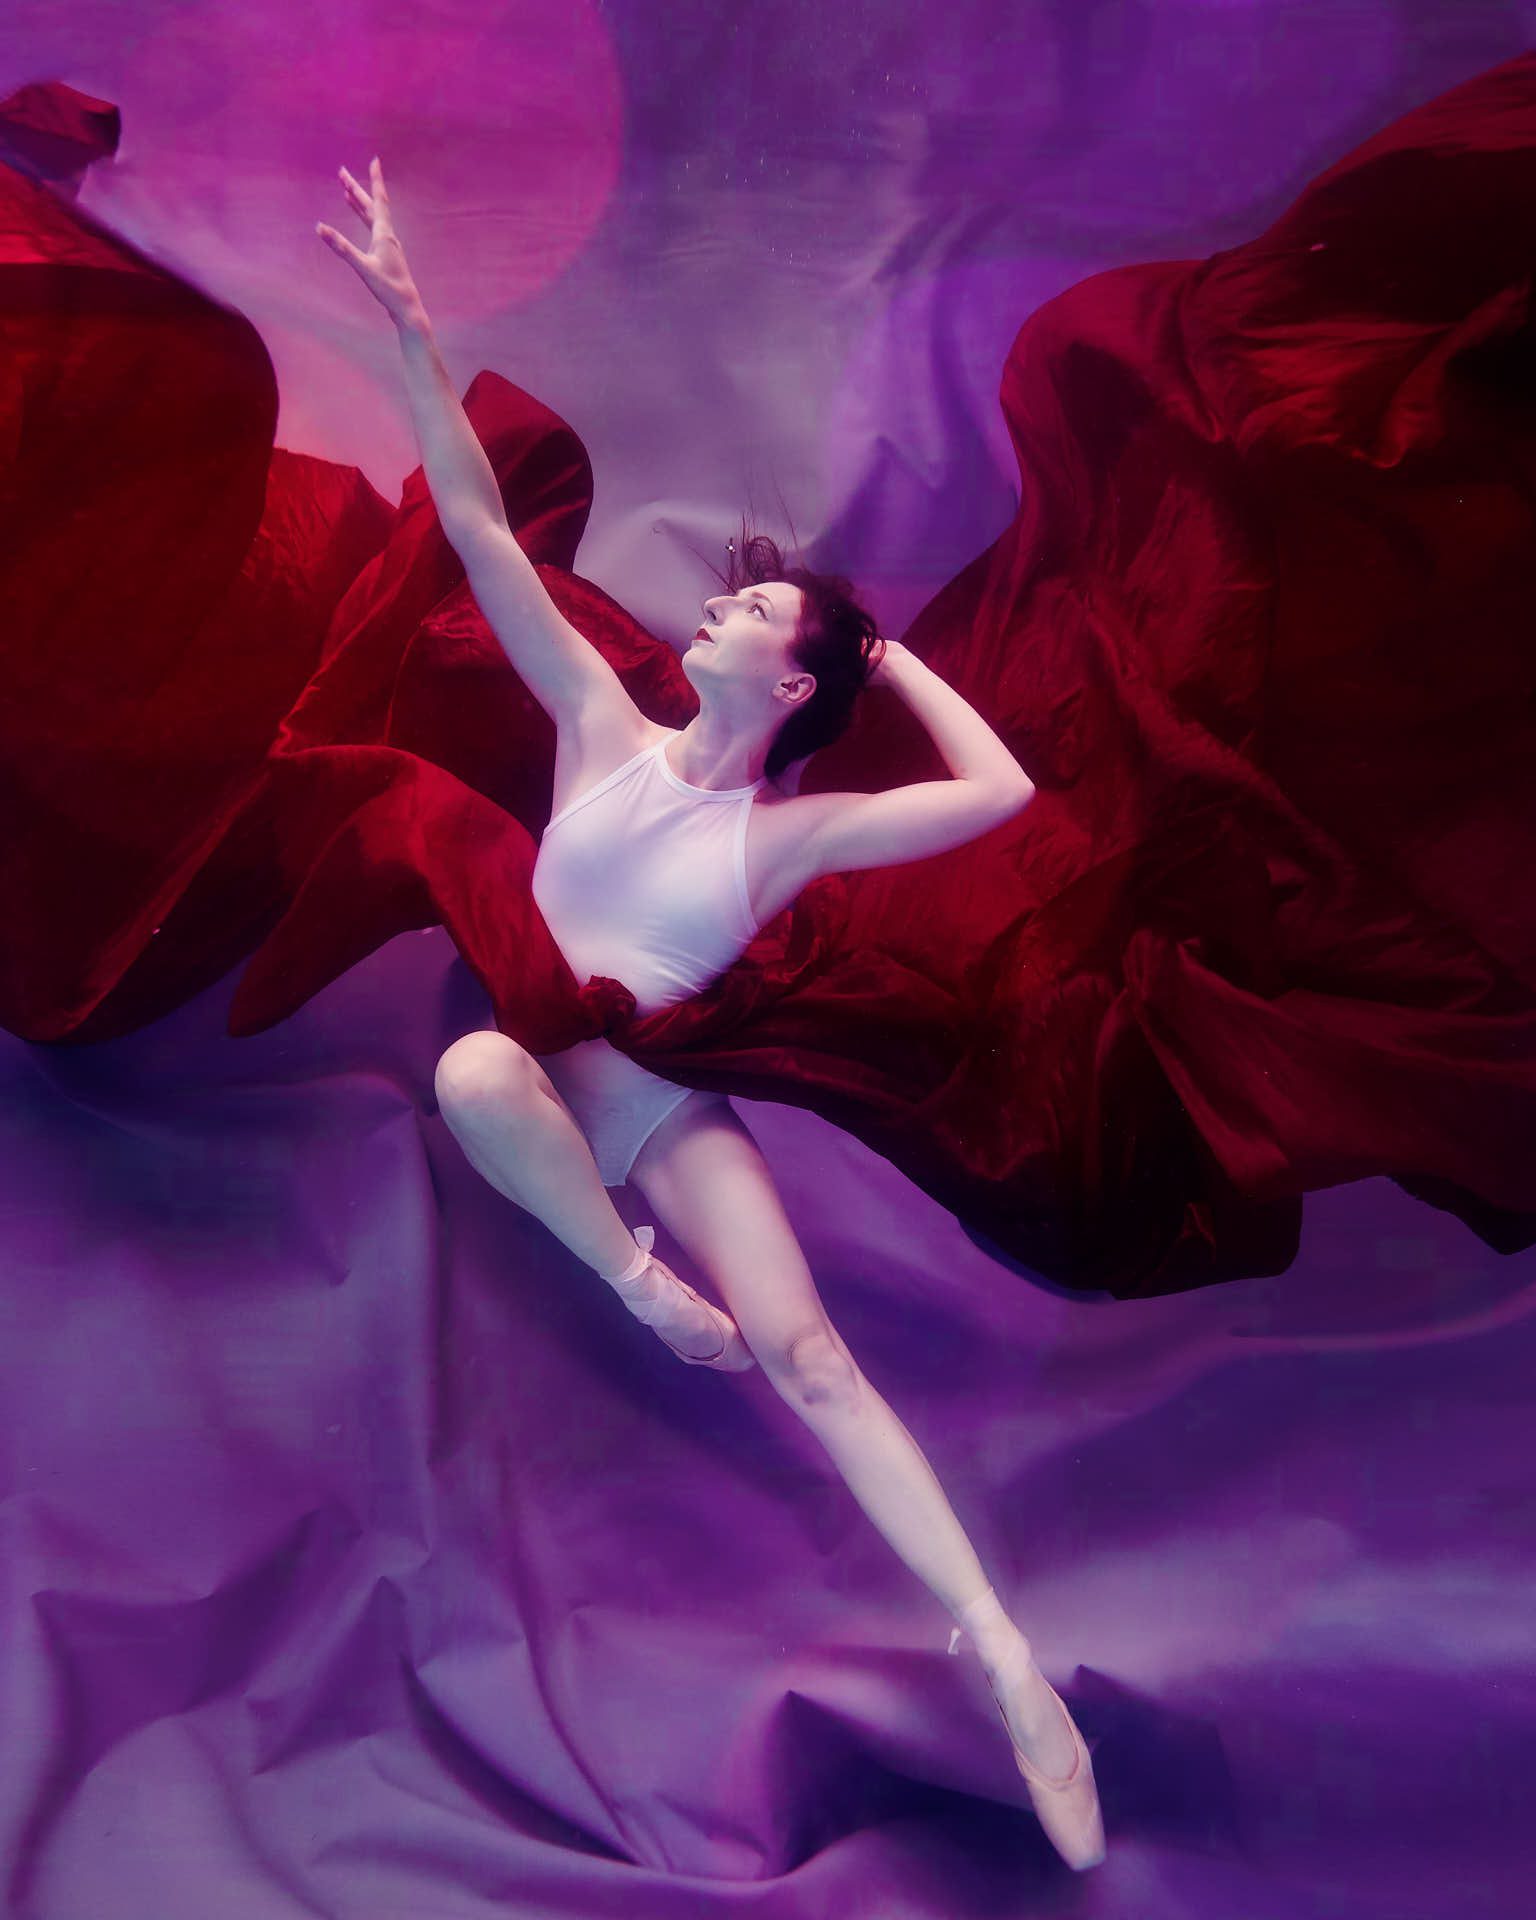 Underwater ballet dancer wearing a white bodysuit against a purple backdrop, with red fabric flowing